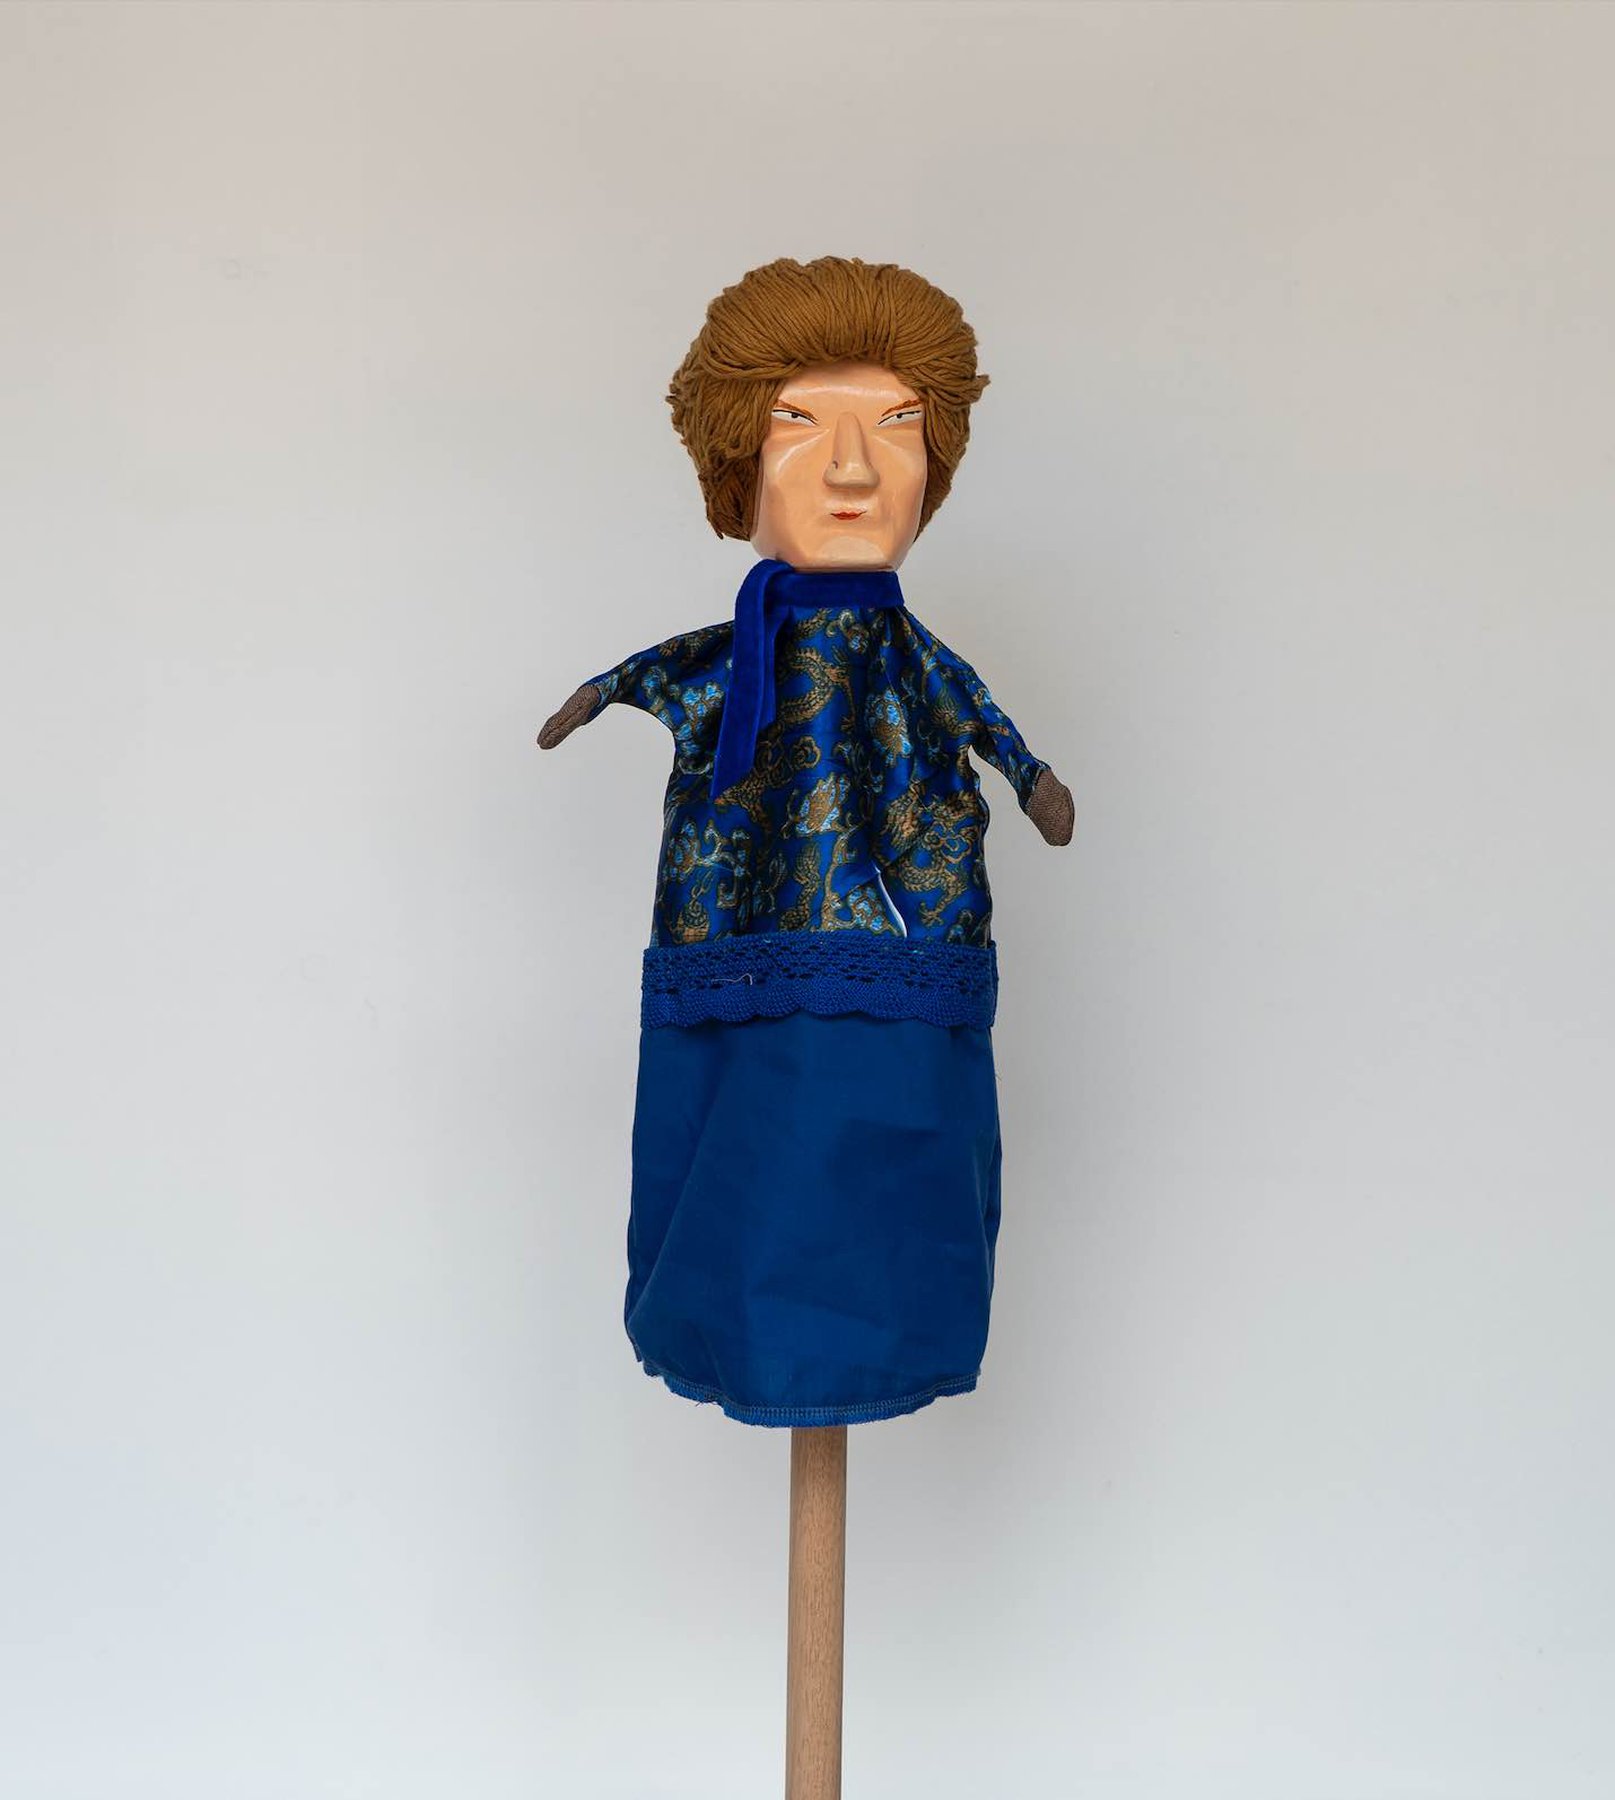 Daniela Ortiz, The Brightness of Greedy Europe, 2022, wood hand-carved, sewn, knitted and embroidered costumes (25 cm) puppet - Margareth Thatcher